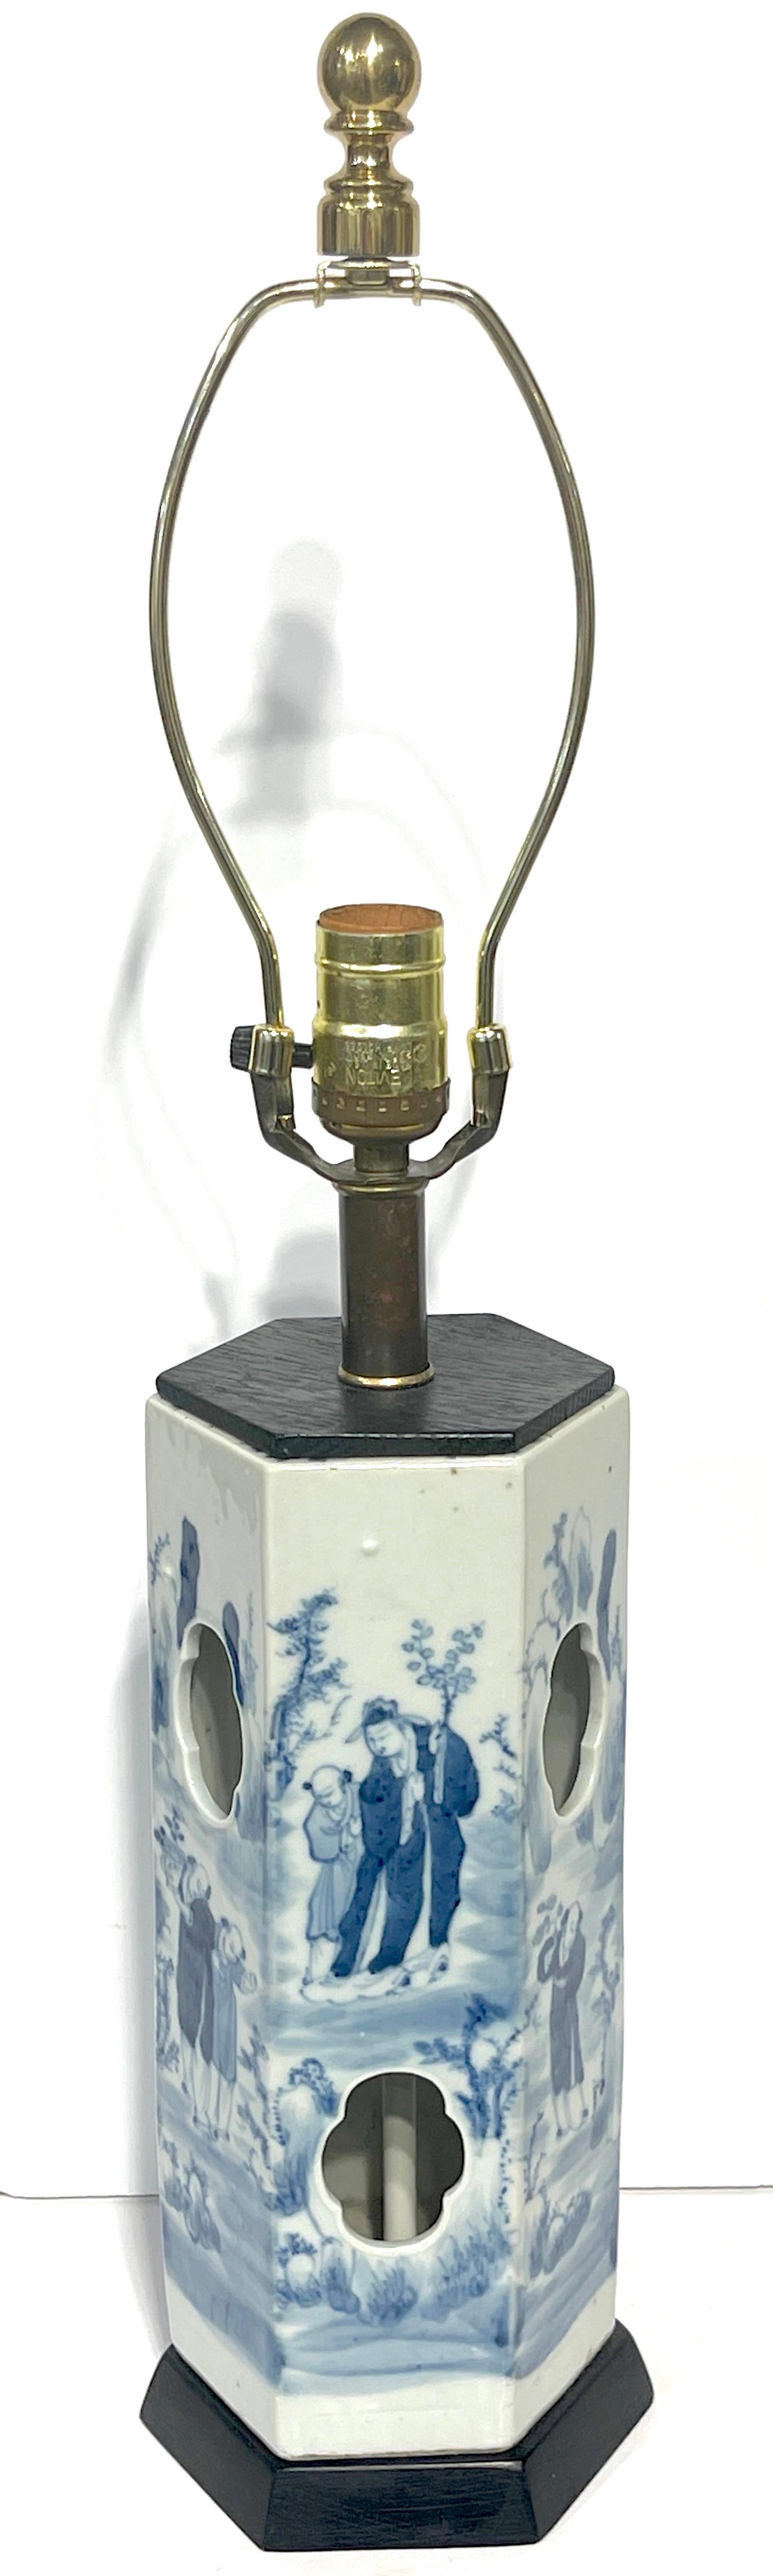 19th Century Qing Period Blue and White Chinese Export Hat Stand, Now as a Lamp
China, 19th Century Lamped in the 20th century


19th-century Qing Period Blue and White Chinese Export Hat Stand, ingeniously repurposed into a lamp during the 20th